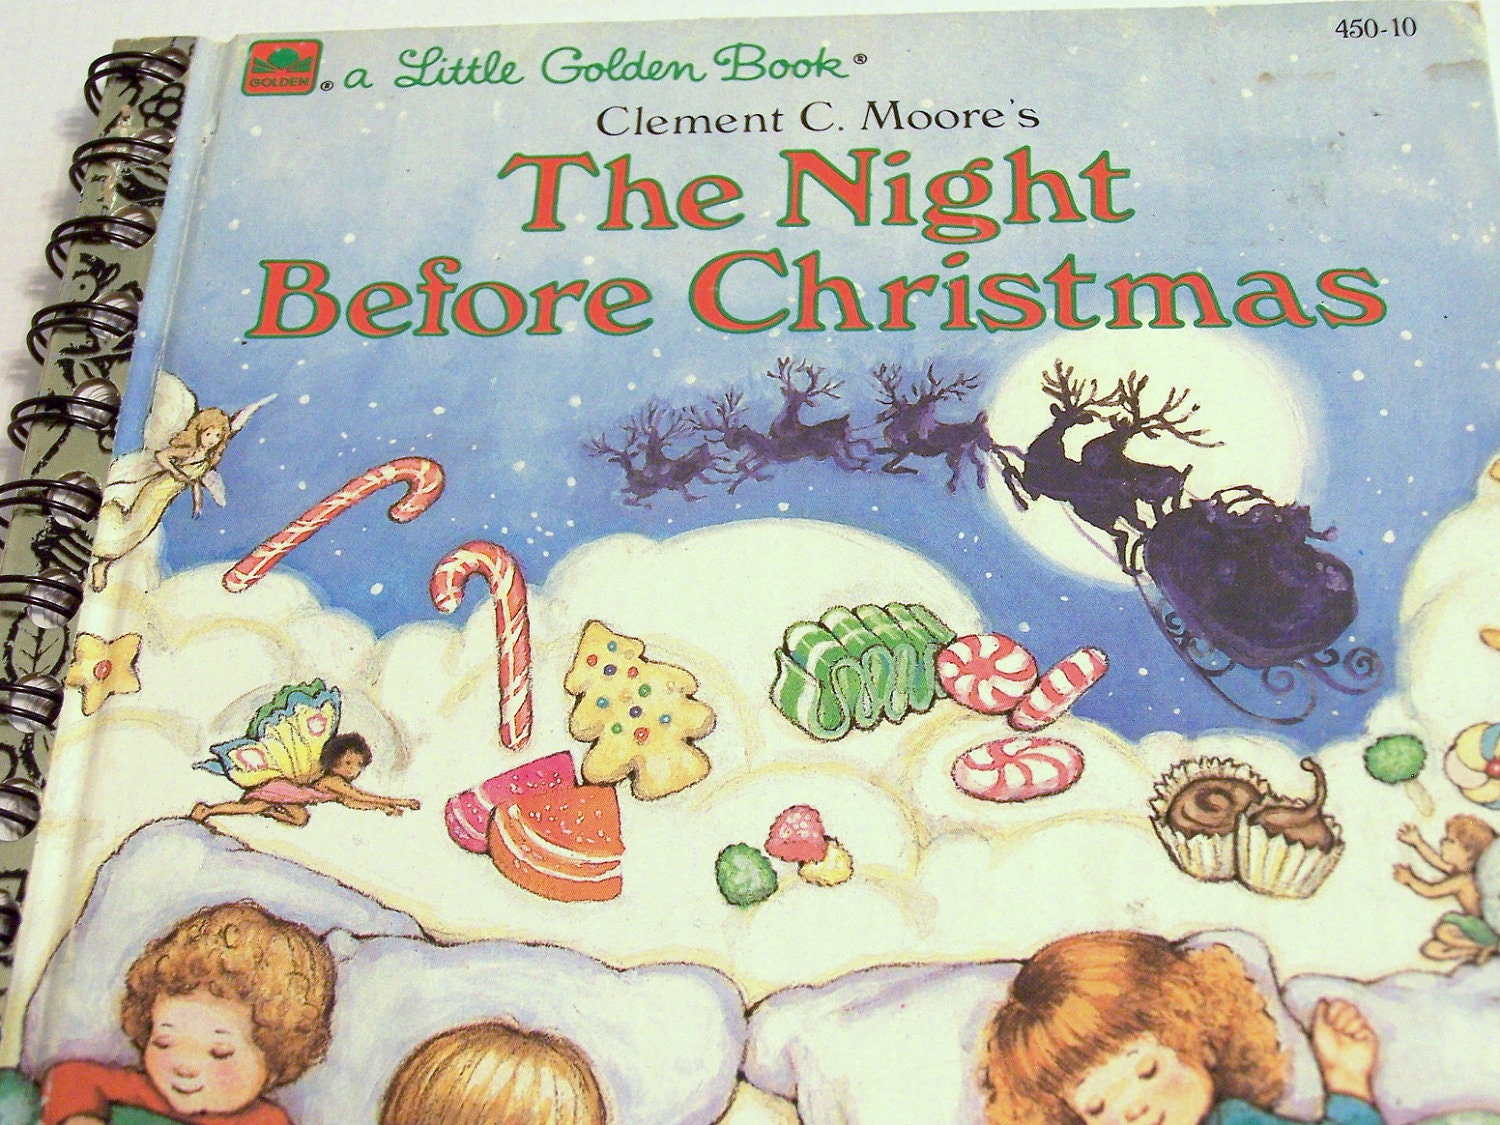 Upcycled Golden Book Notebook Upcycled The Night Before Christmas Notebook Childrens Book:  The Night Before Christmas by Clement C. Moore